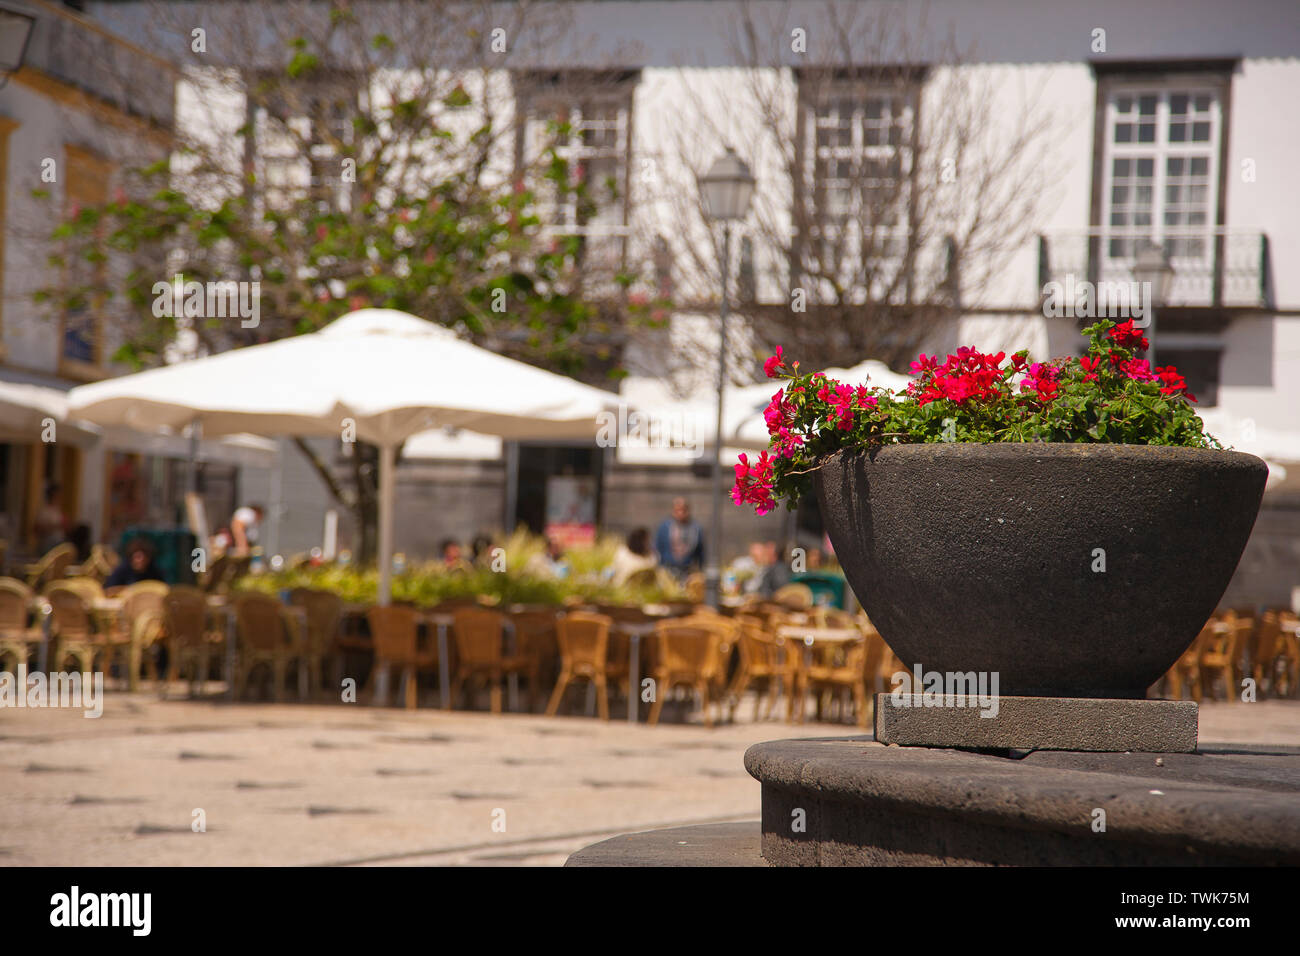 Peaceful plazza in the city of Ponta Delgada, Sao Miguel island, Azores, Portugal. Focus is on the flower pot. Stock Photo